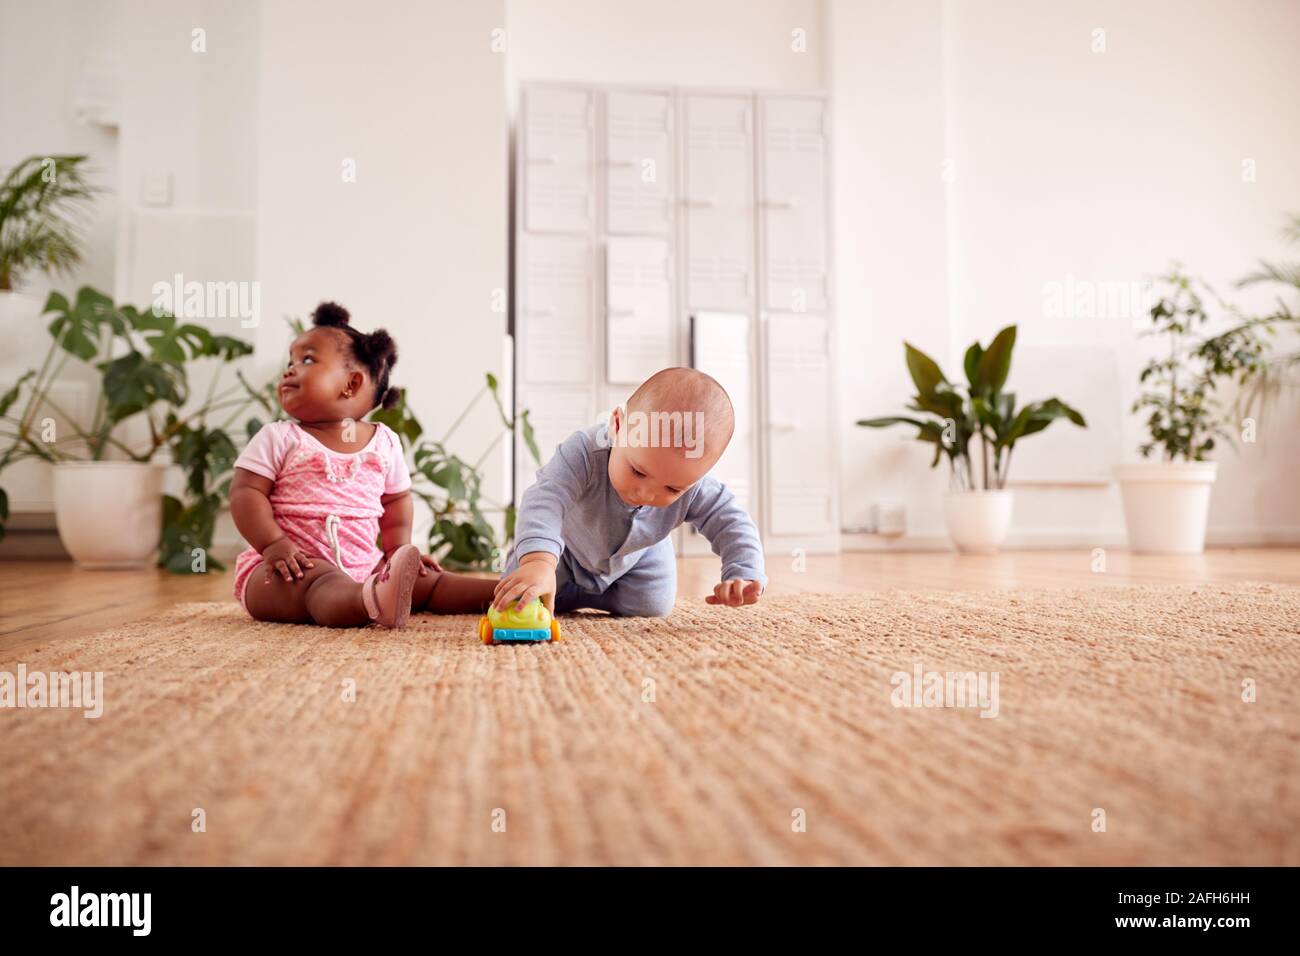 Baby Boy And Girl Playing With Toys On Rug At Home Together Stock Photo